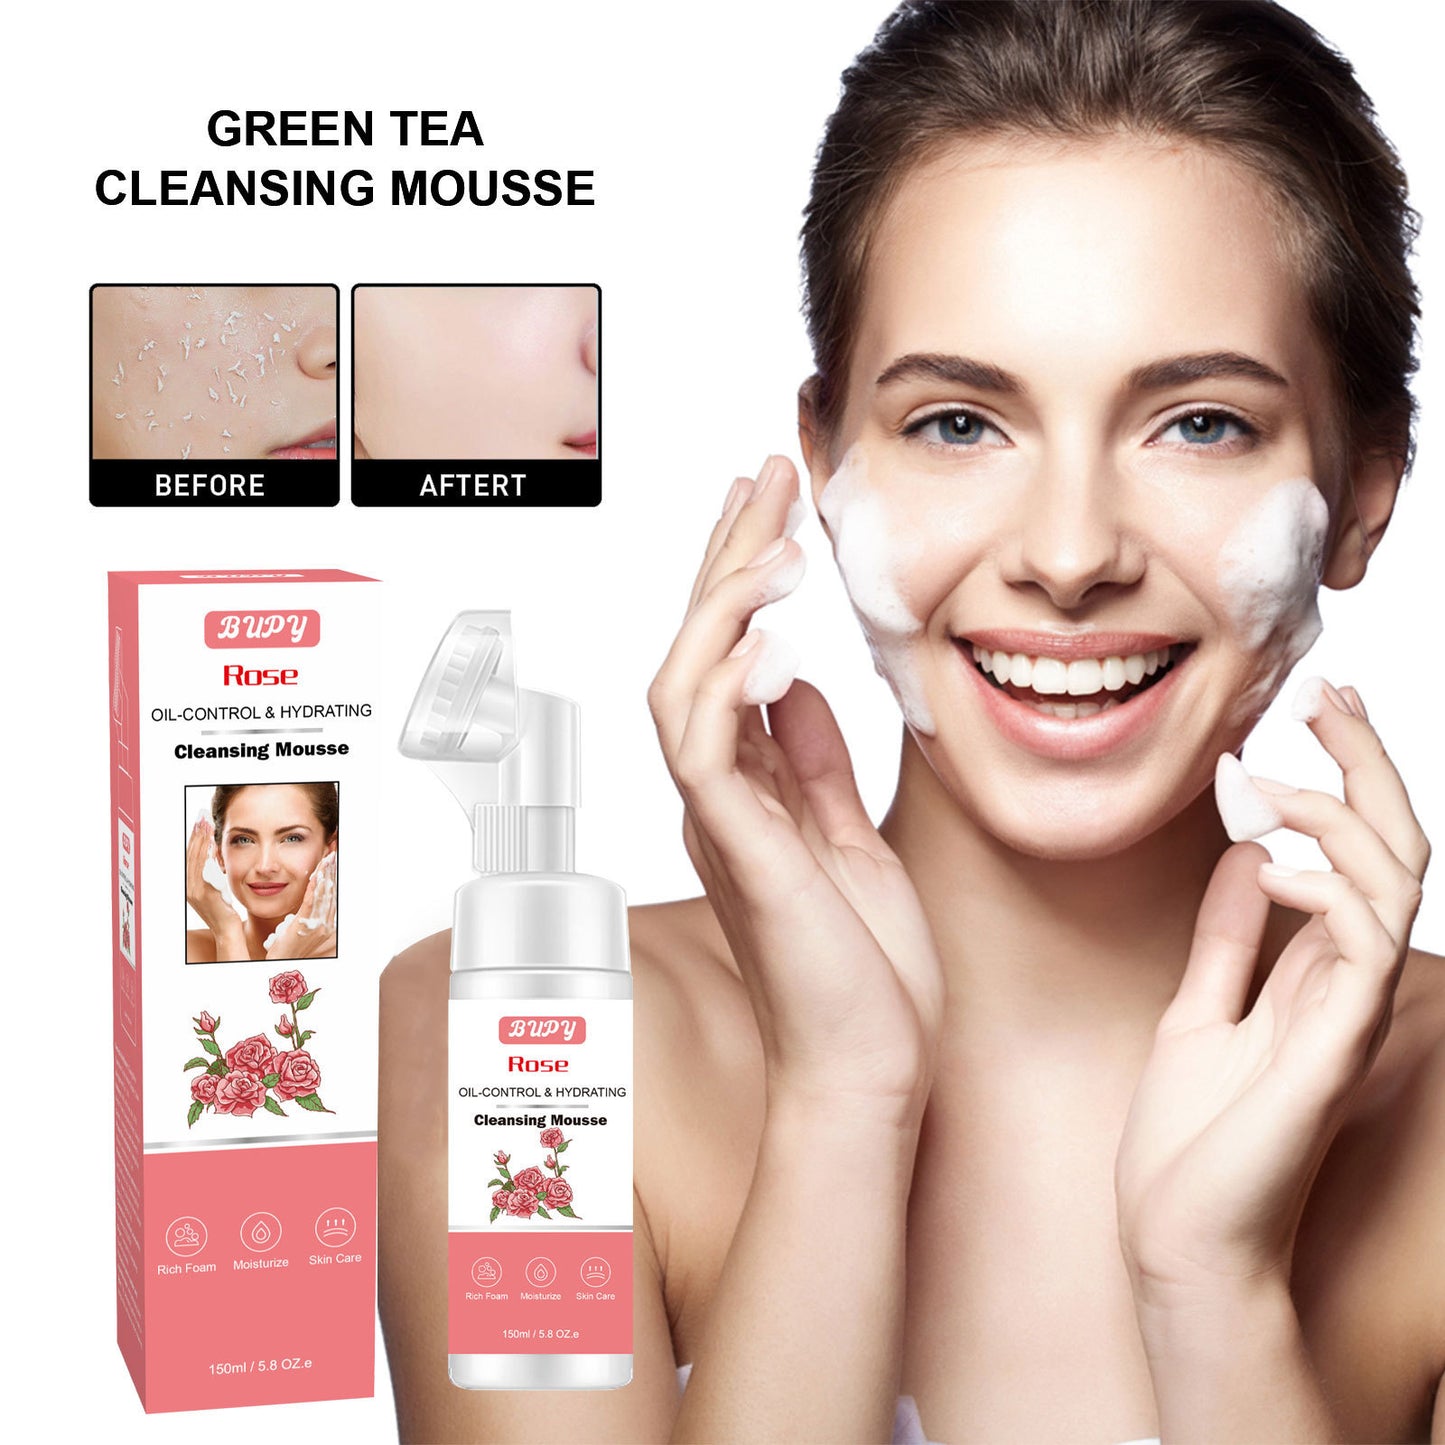 OEM & ODM Wholesale Rose Cleansing Mousse, Refreshing Oil Control, Cleansing and Makeup Removal, Moisturizing Face Cleanser 324